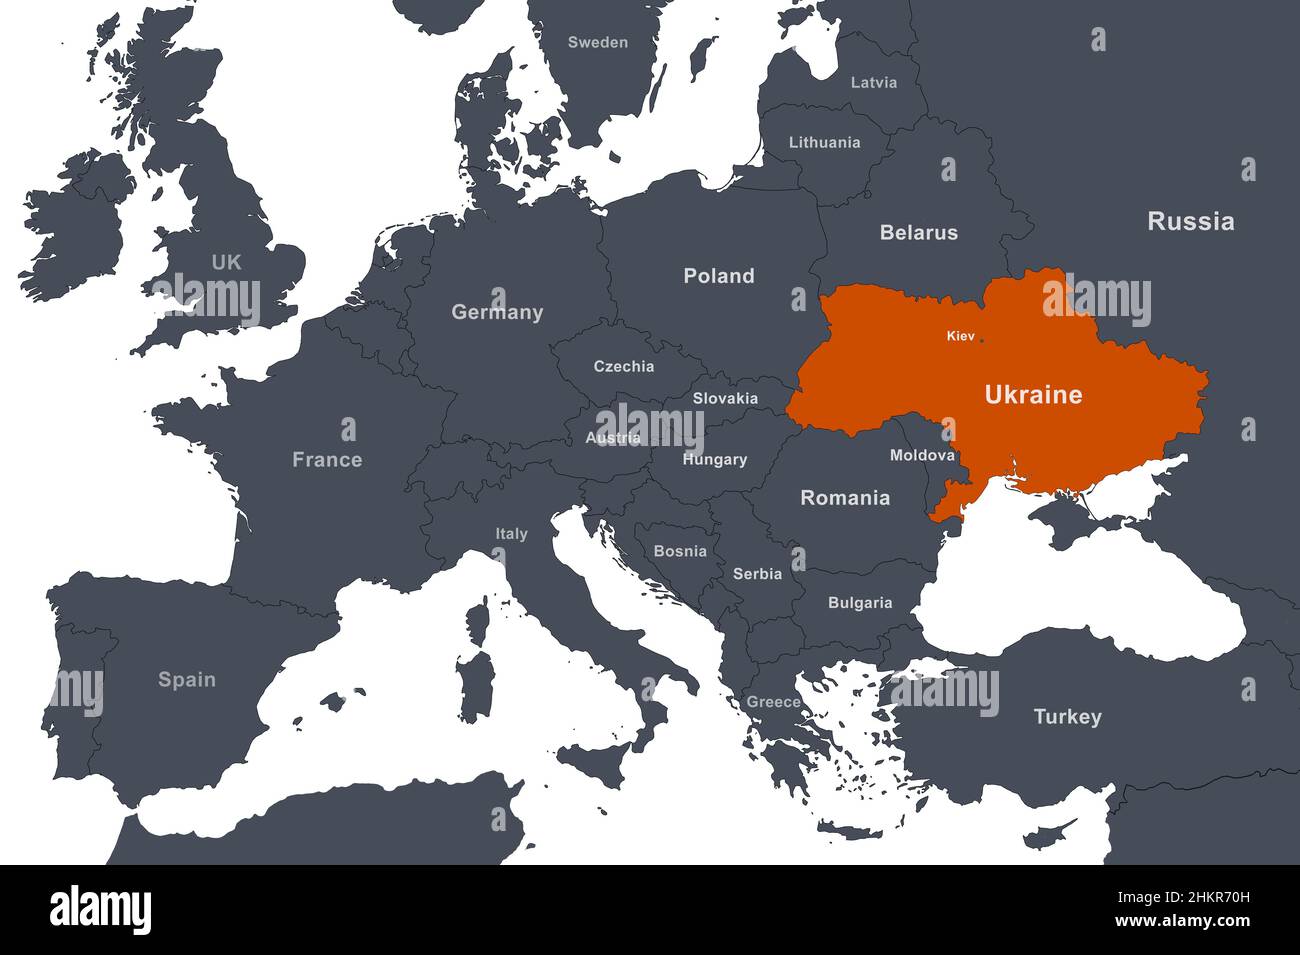 Ukraine on Europe outline map with borders. Political map with Black Sea region and territory of Russia, Crimea, Belarus, Poland and other countries. Stock Photo